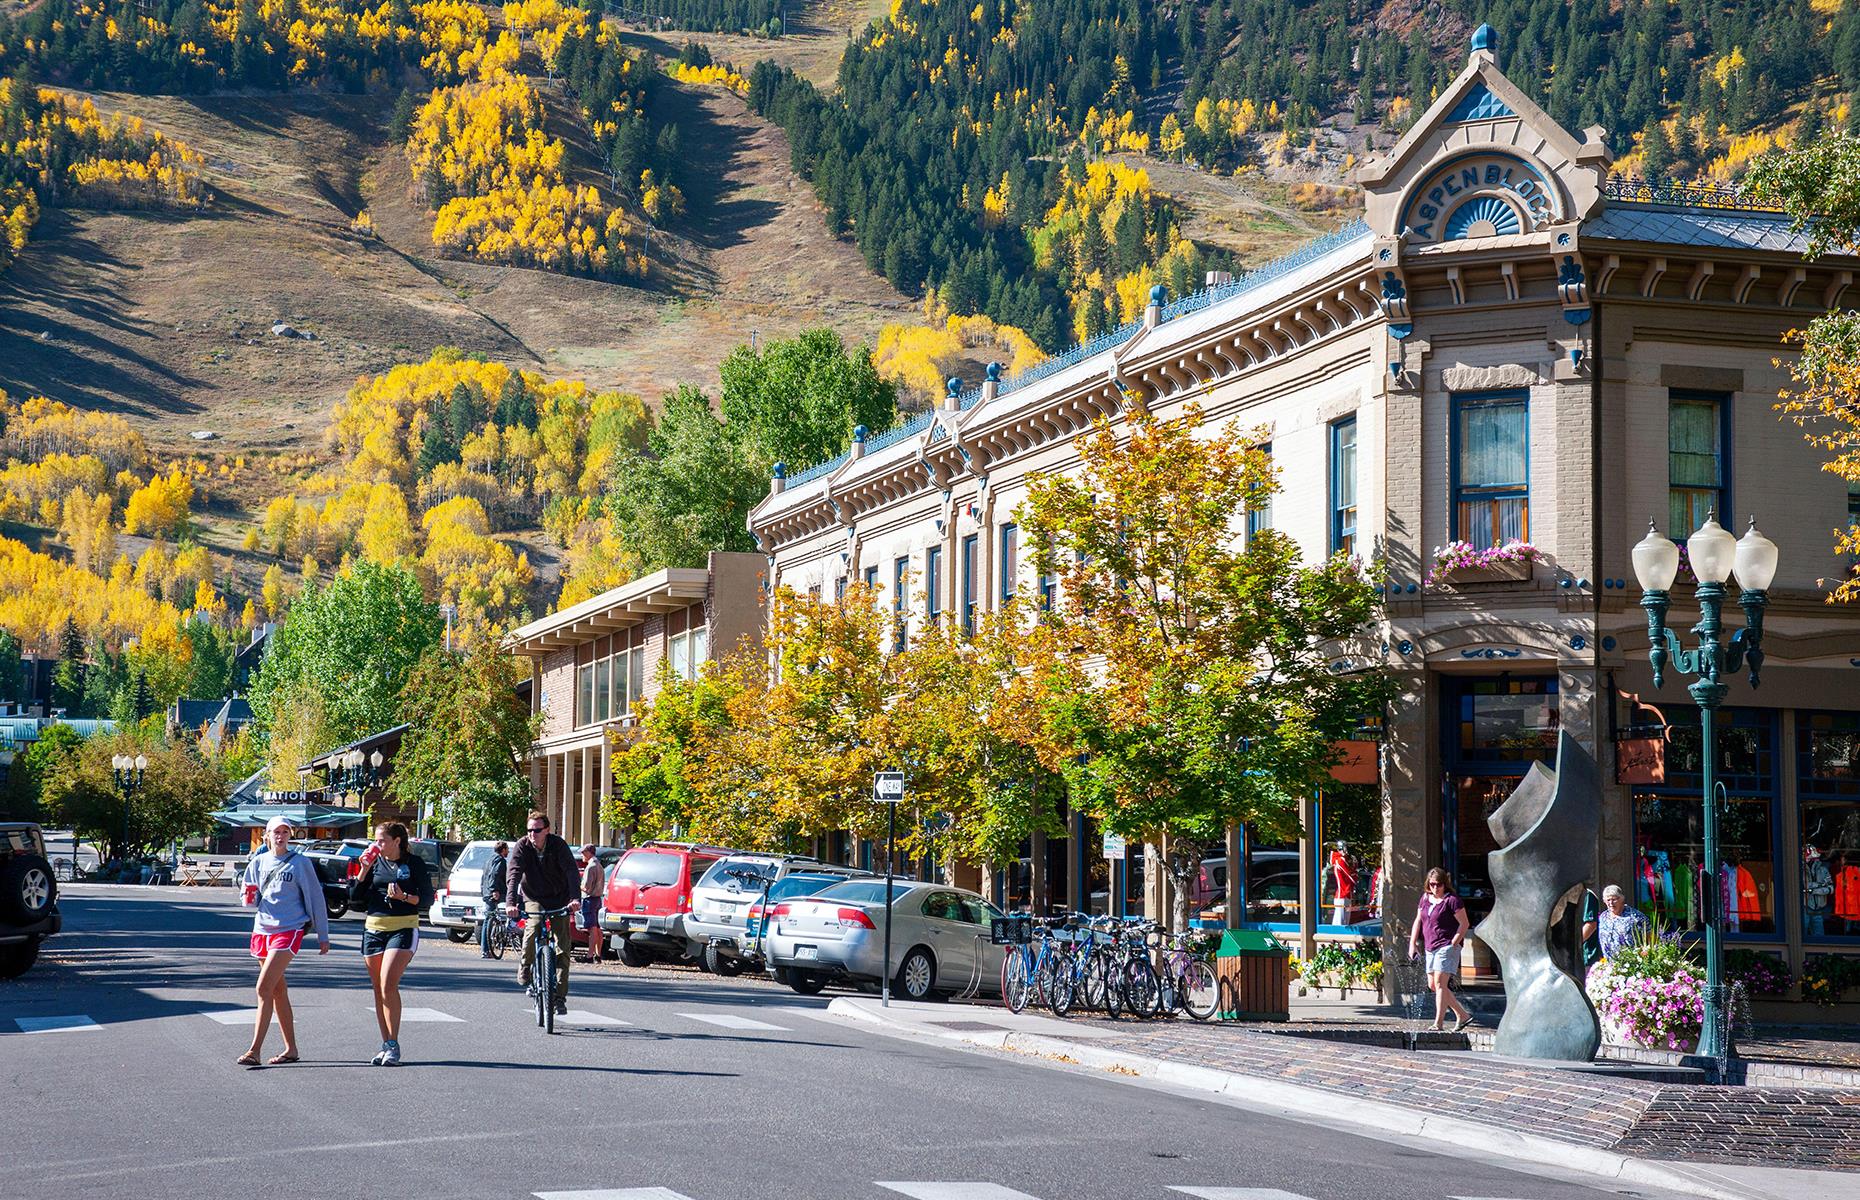 <p>This picturesque mountain town might be better known as a ski resort, but it attracts year-round visitors for hikes through lush summer meadows and leaf-peeping in fall. It's all easily done without wheels as its downtown area is extremely compact, and <a href="https://www.aspen.gov/279/Aspens-Free-Shuttles">free local shuttles</a> connect the city center with nearby neighborhoods and recreational areas. Numerous hiking and biking trails stretch out from Aspen into the wilderness, while Maroon Bells, one of the most photographed mountain ranges in North America, can be accessed via a <a href="https://www.rfta.com/routes/maroon-bells/">short shuttle ride</a>. </p>